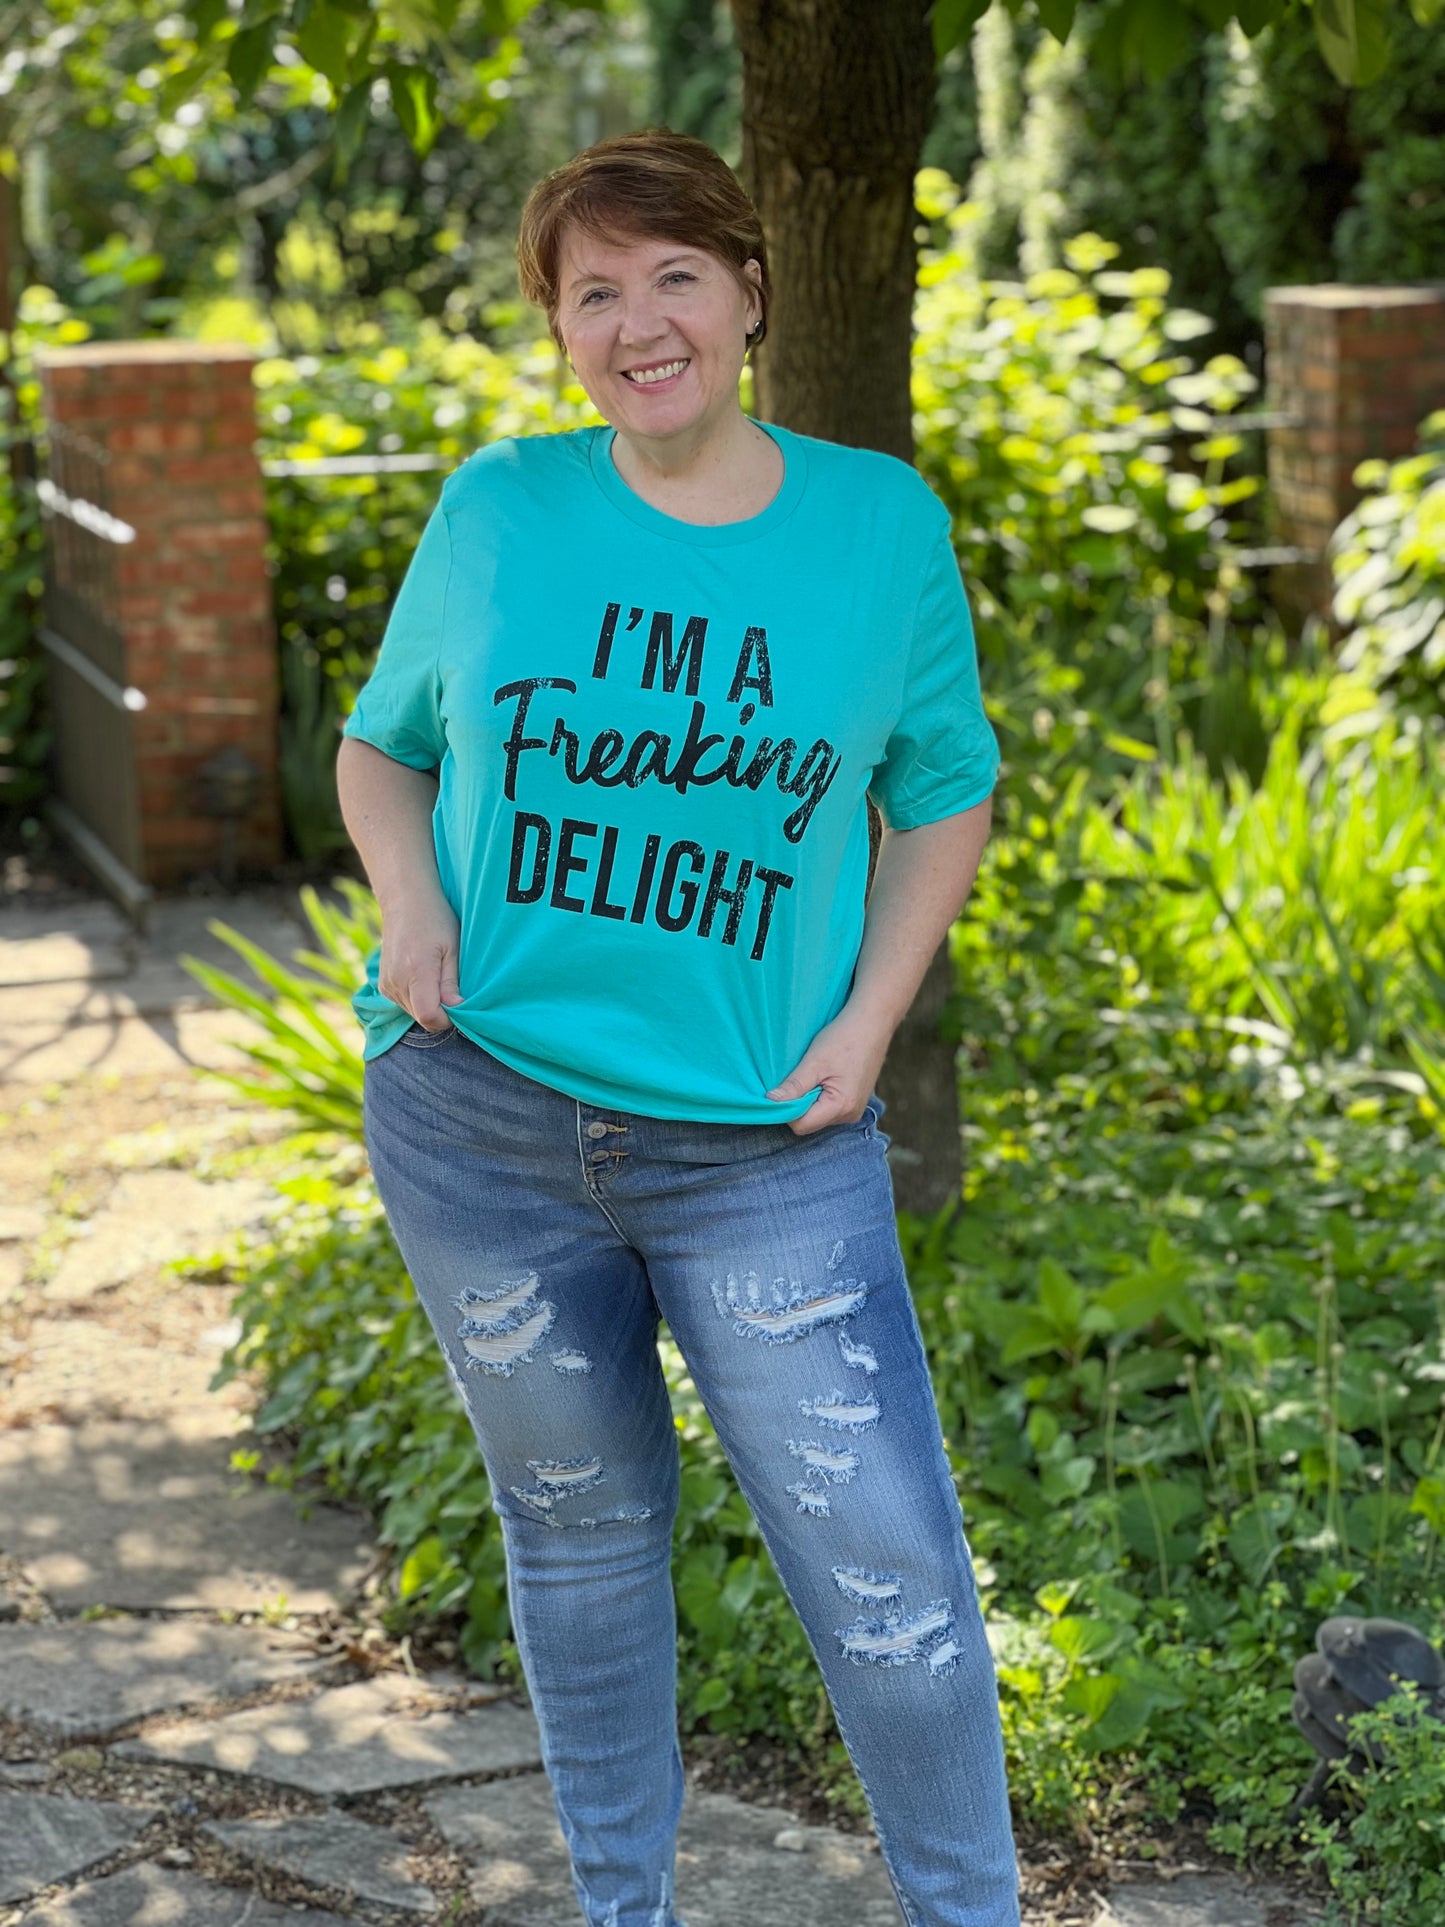 "I'm a Freaking Delight" Tees